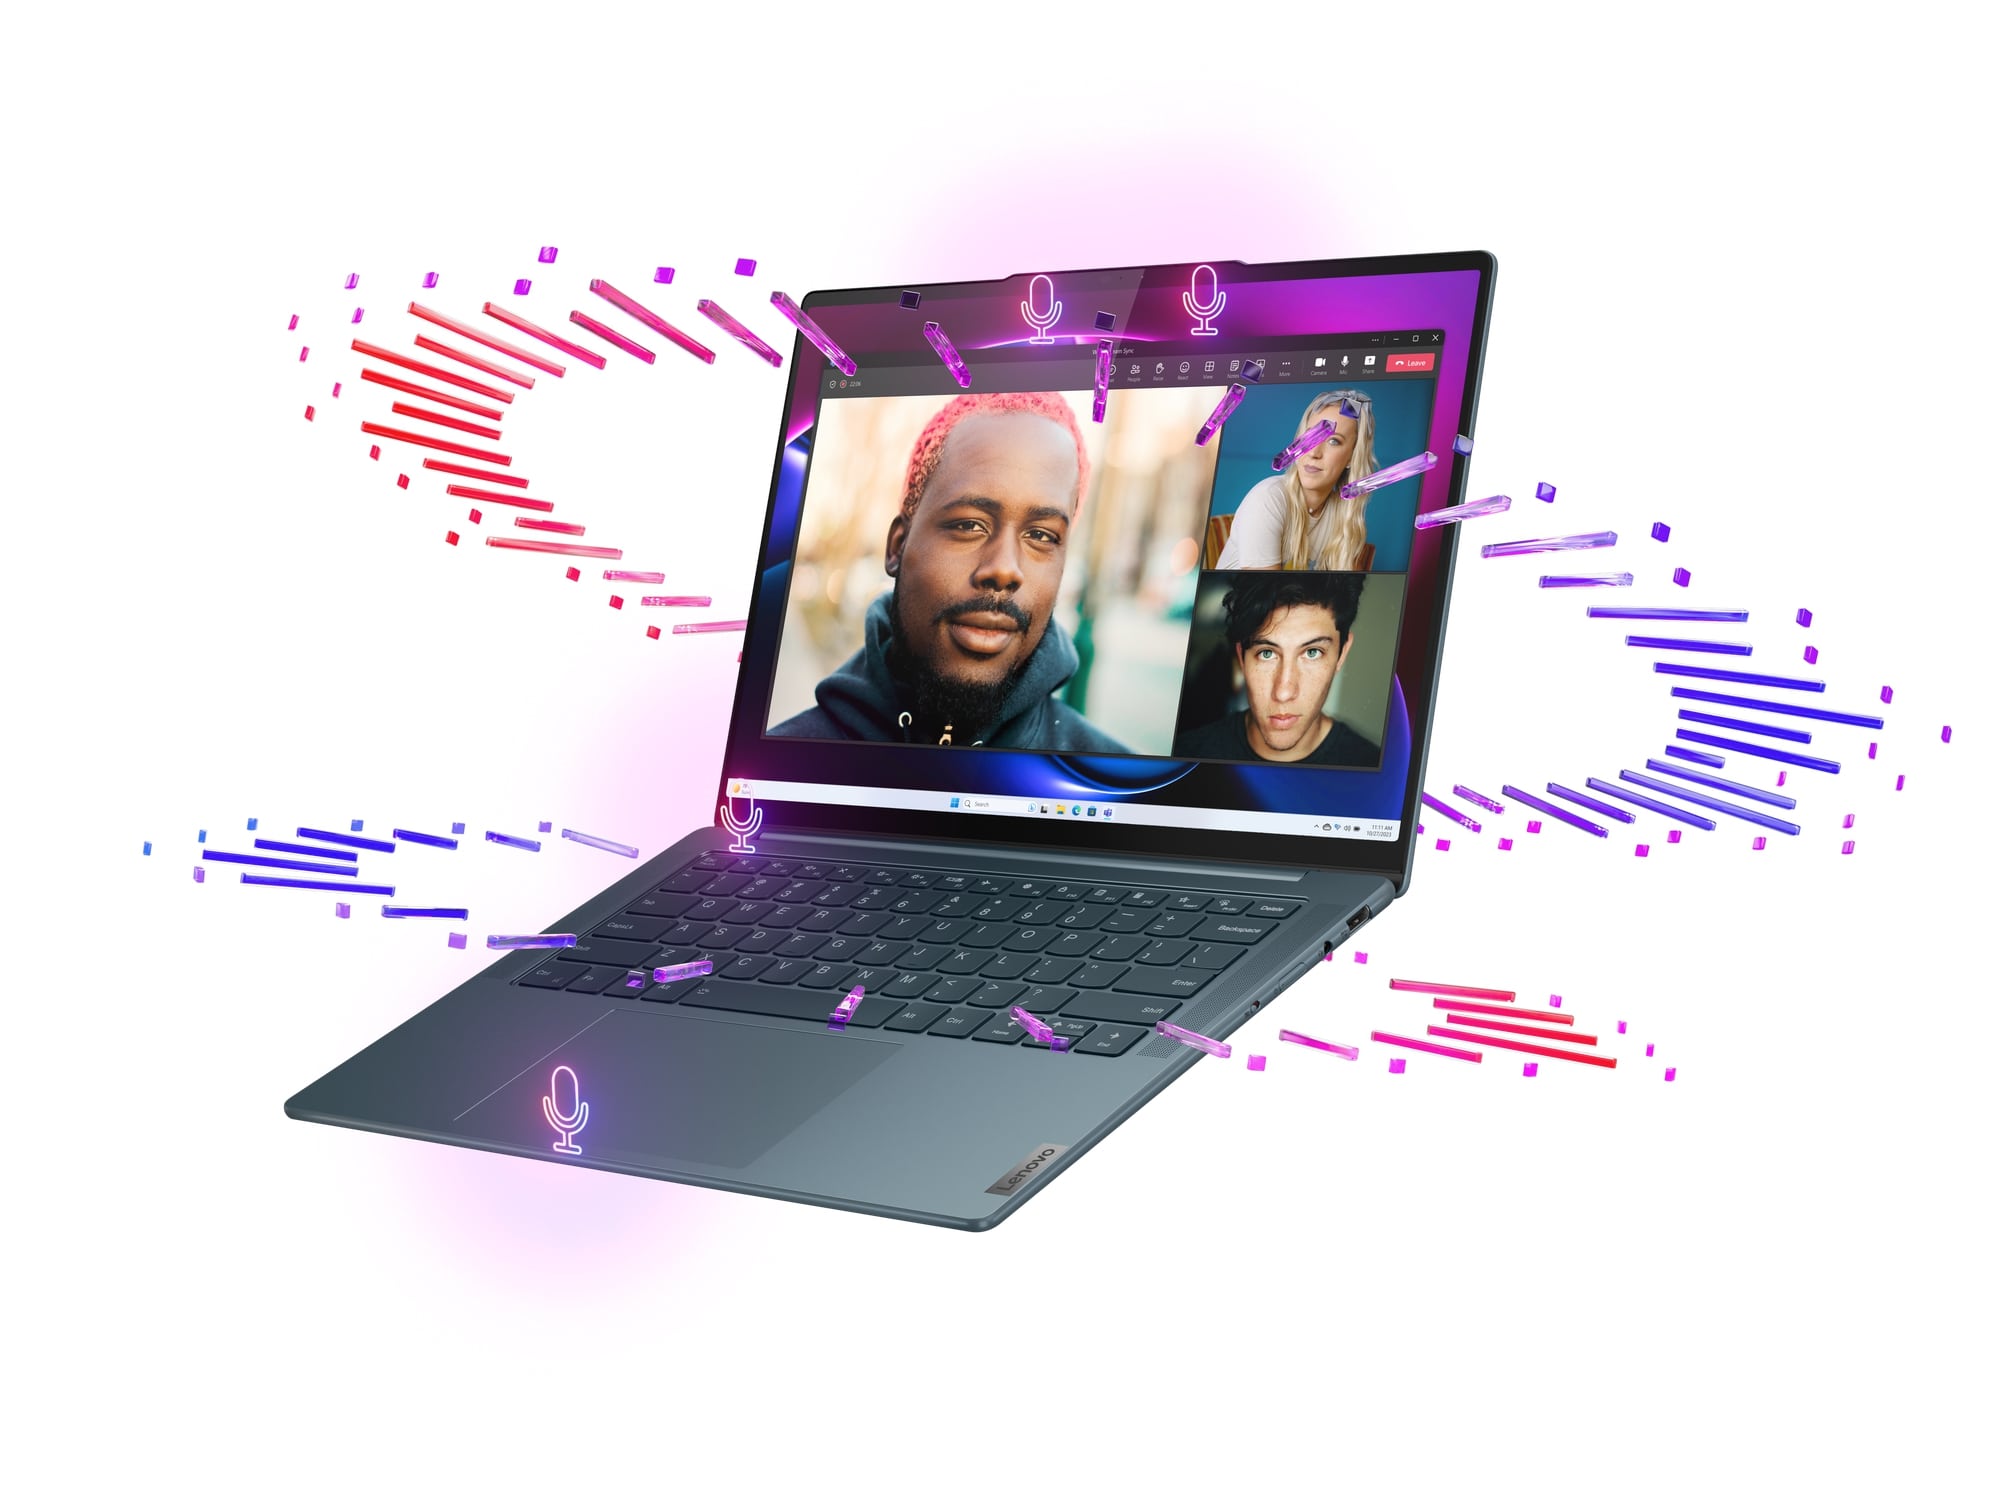 Lenovo Yoga Pro 7i 14 and Pro 7 14 Gen 9 laptops announced with